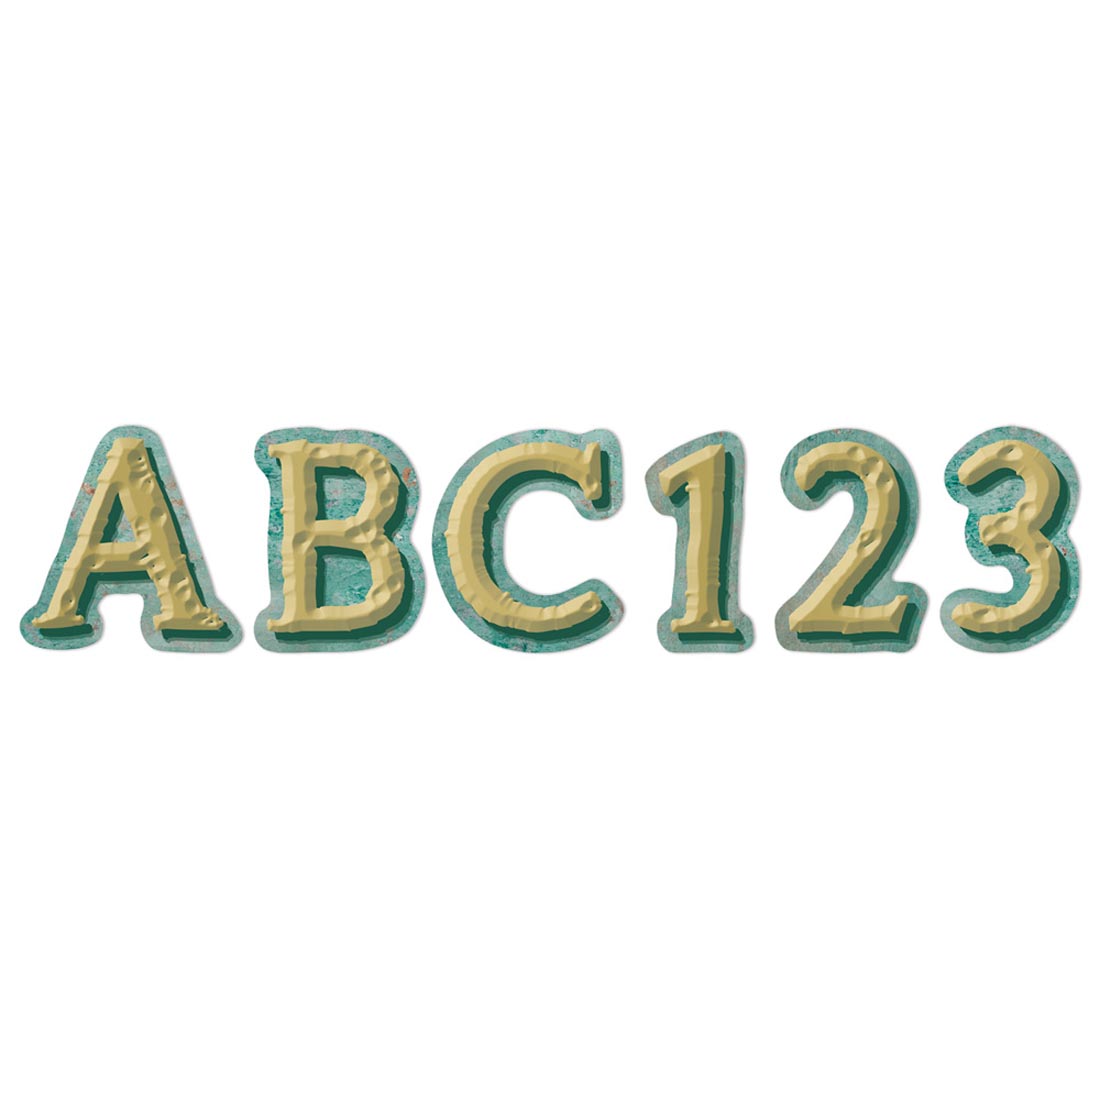 ABC and 123 from the Curiosity Garden Deco Letters By Eureka